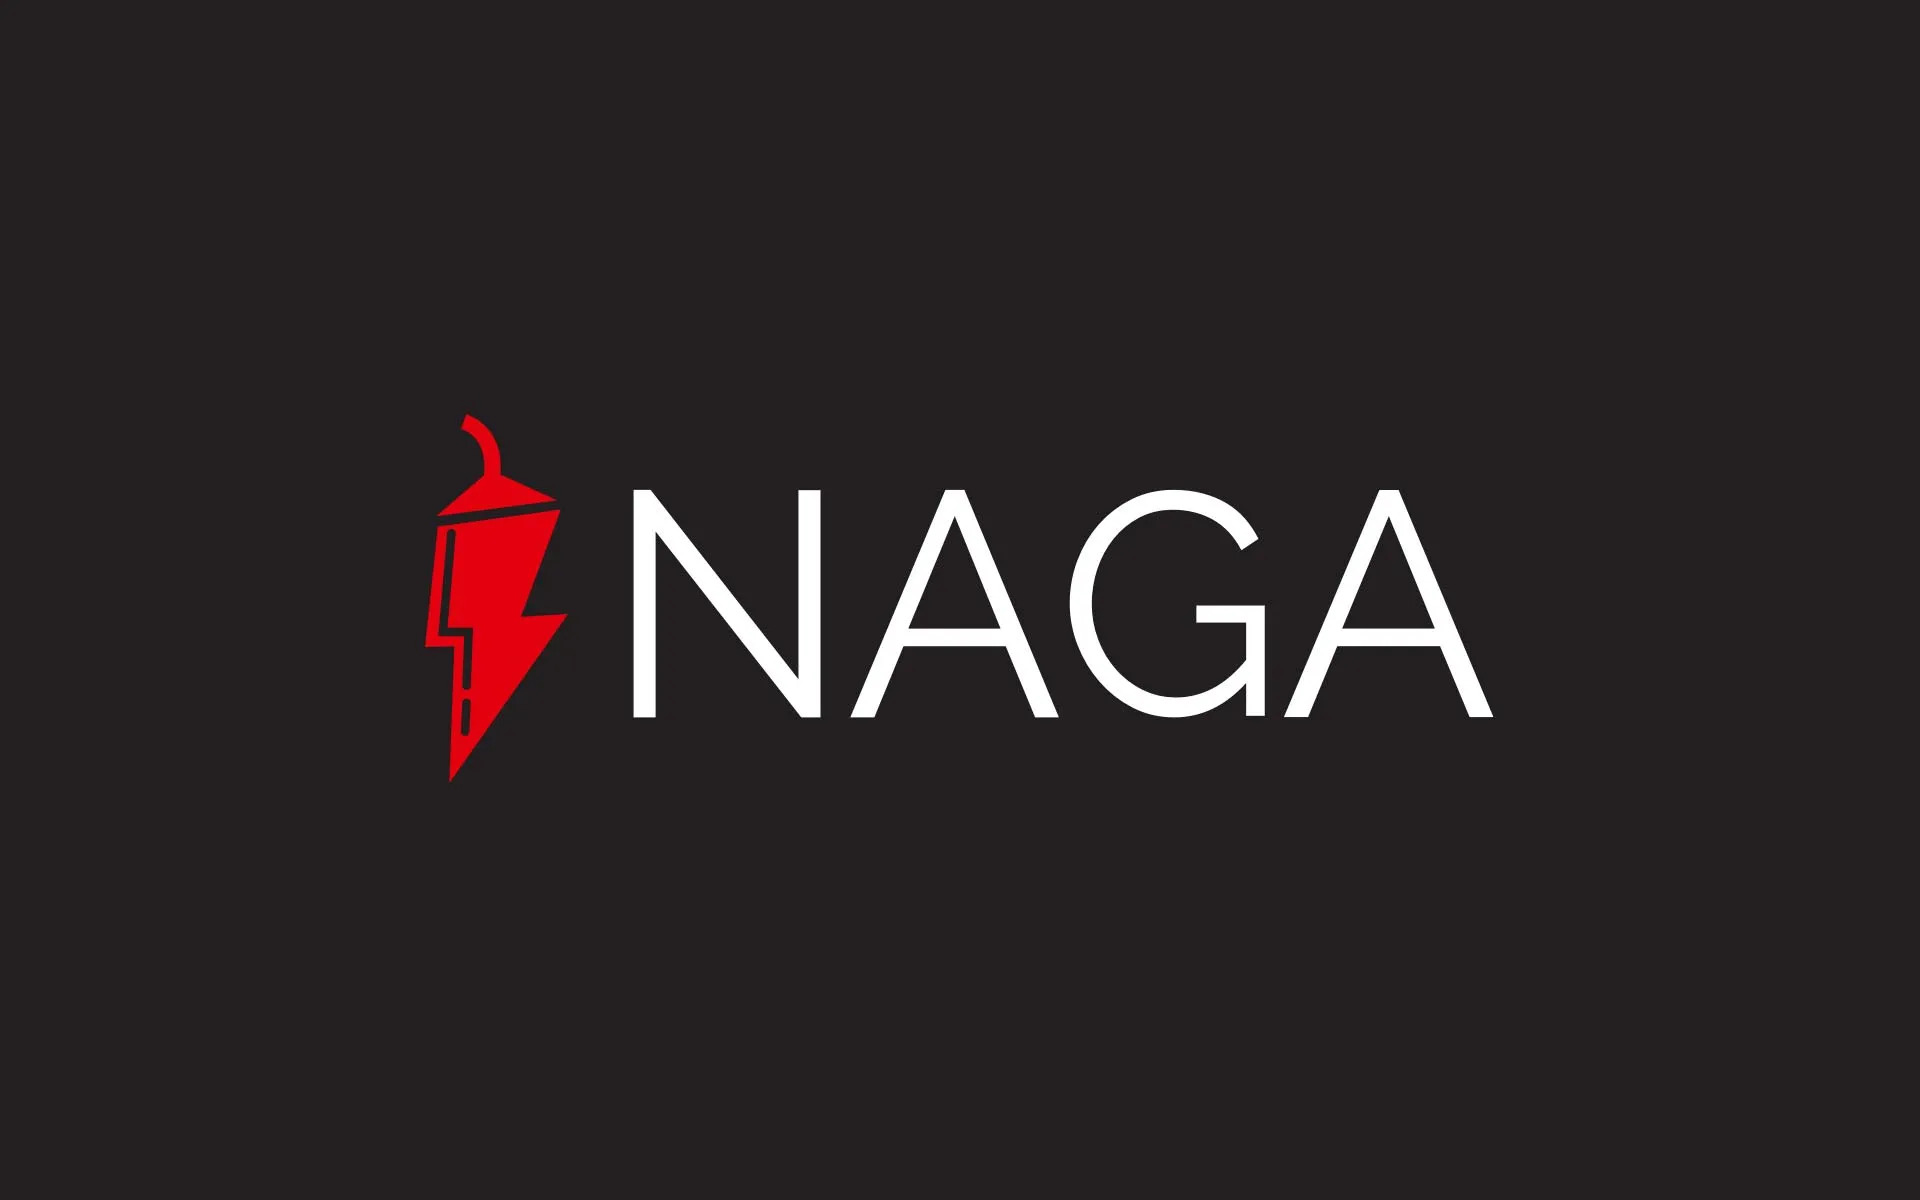 NAGA Group shareholders approve merger with CAPEX.com, signaling a new era in financial services